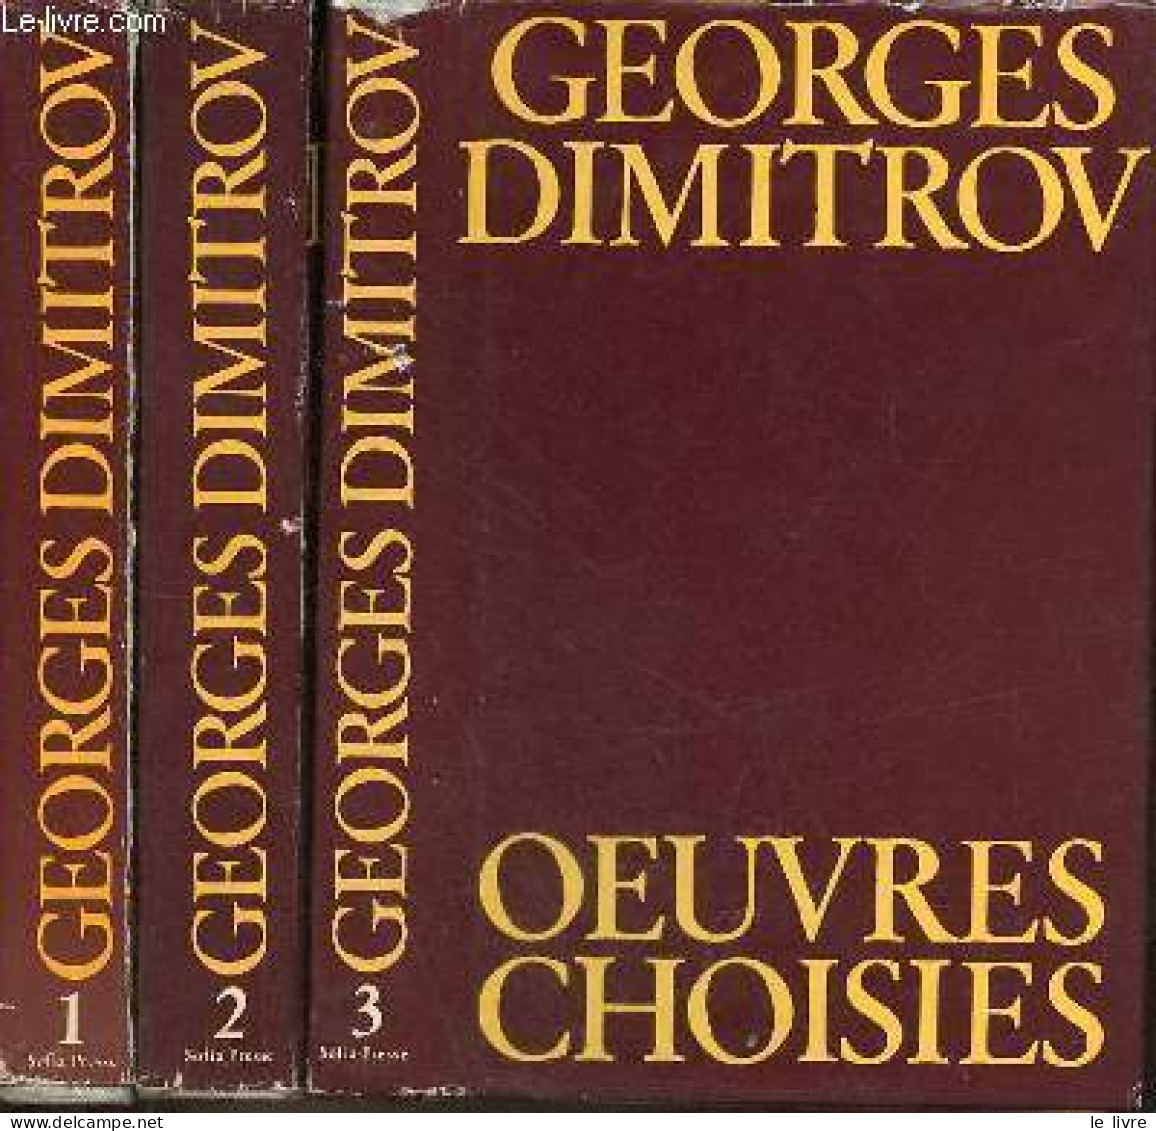 Oeuvres Choisies - Tome 1+2+3 (3 Volumes). - Dimitrov Georges - 1978 - Lingue Slave